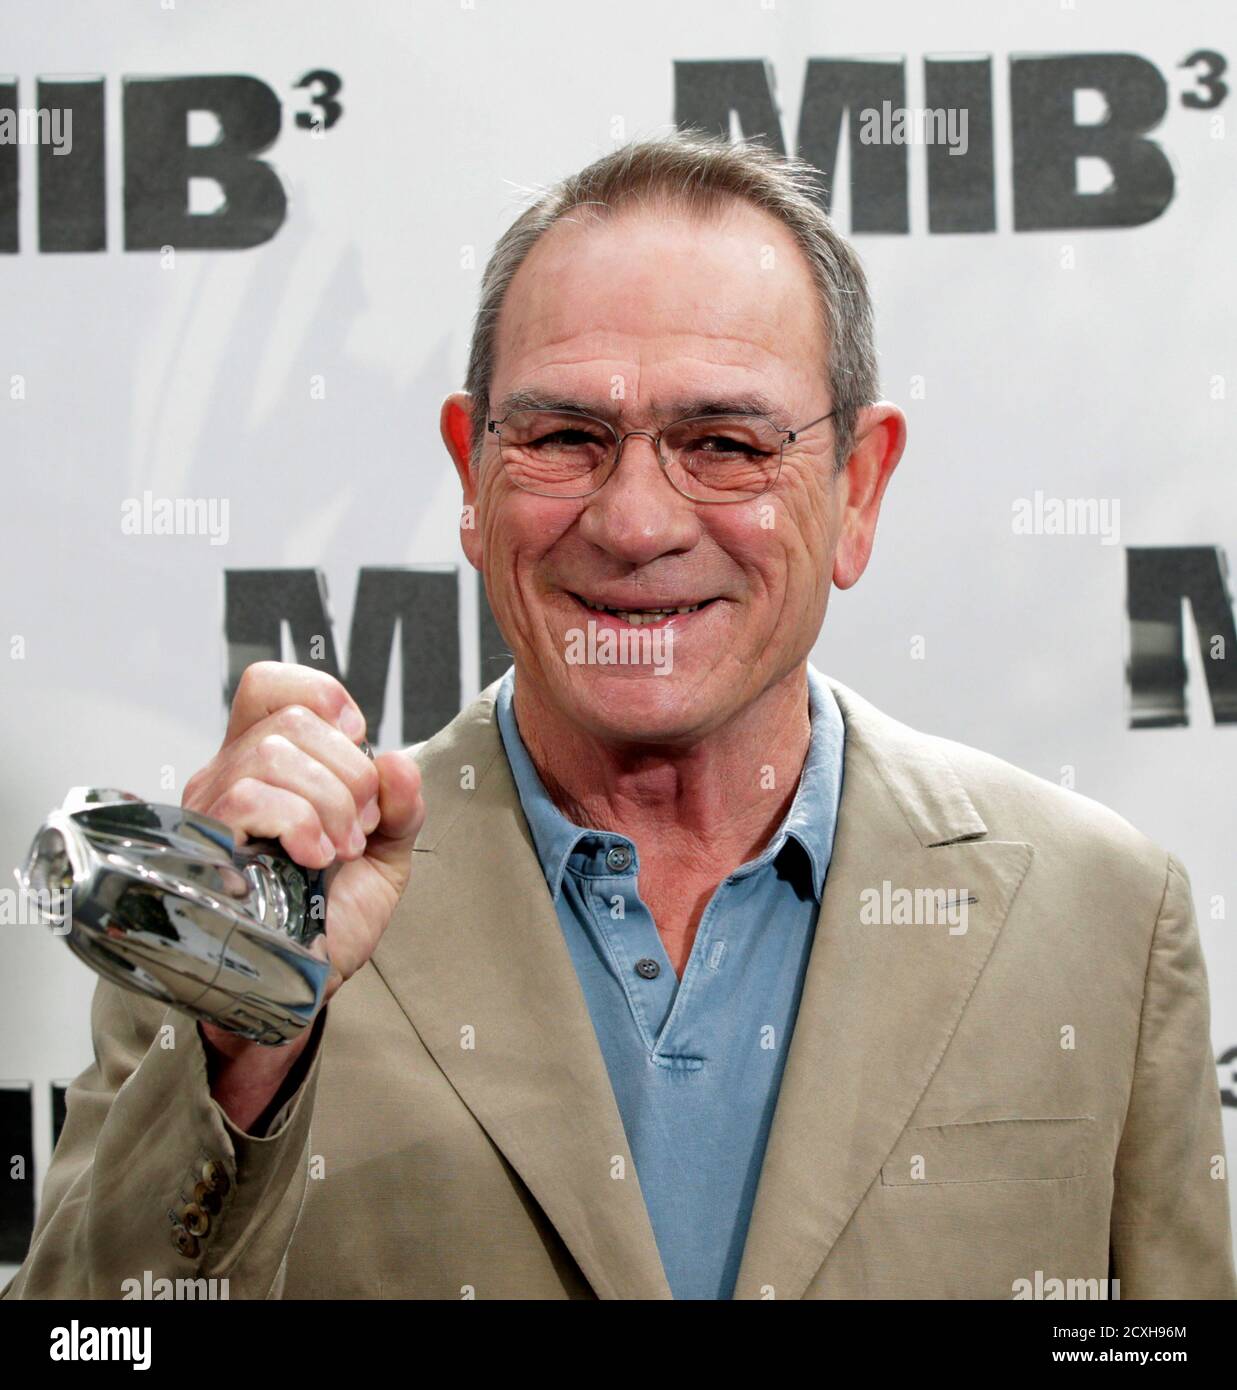 Cast member Tommy Lee Jones holds a prop gun to be placed in a time capsule  at a photo call while promoting his upcoming film 